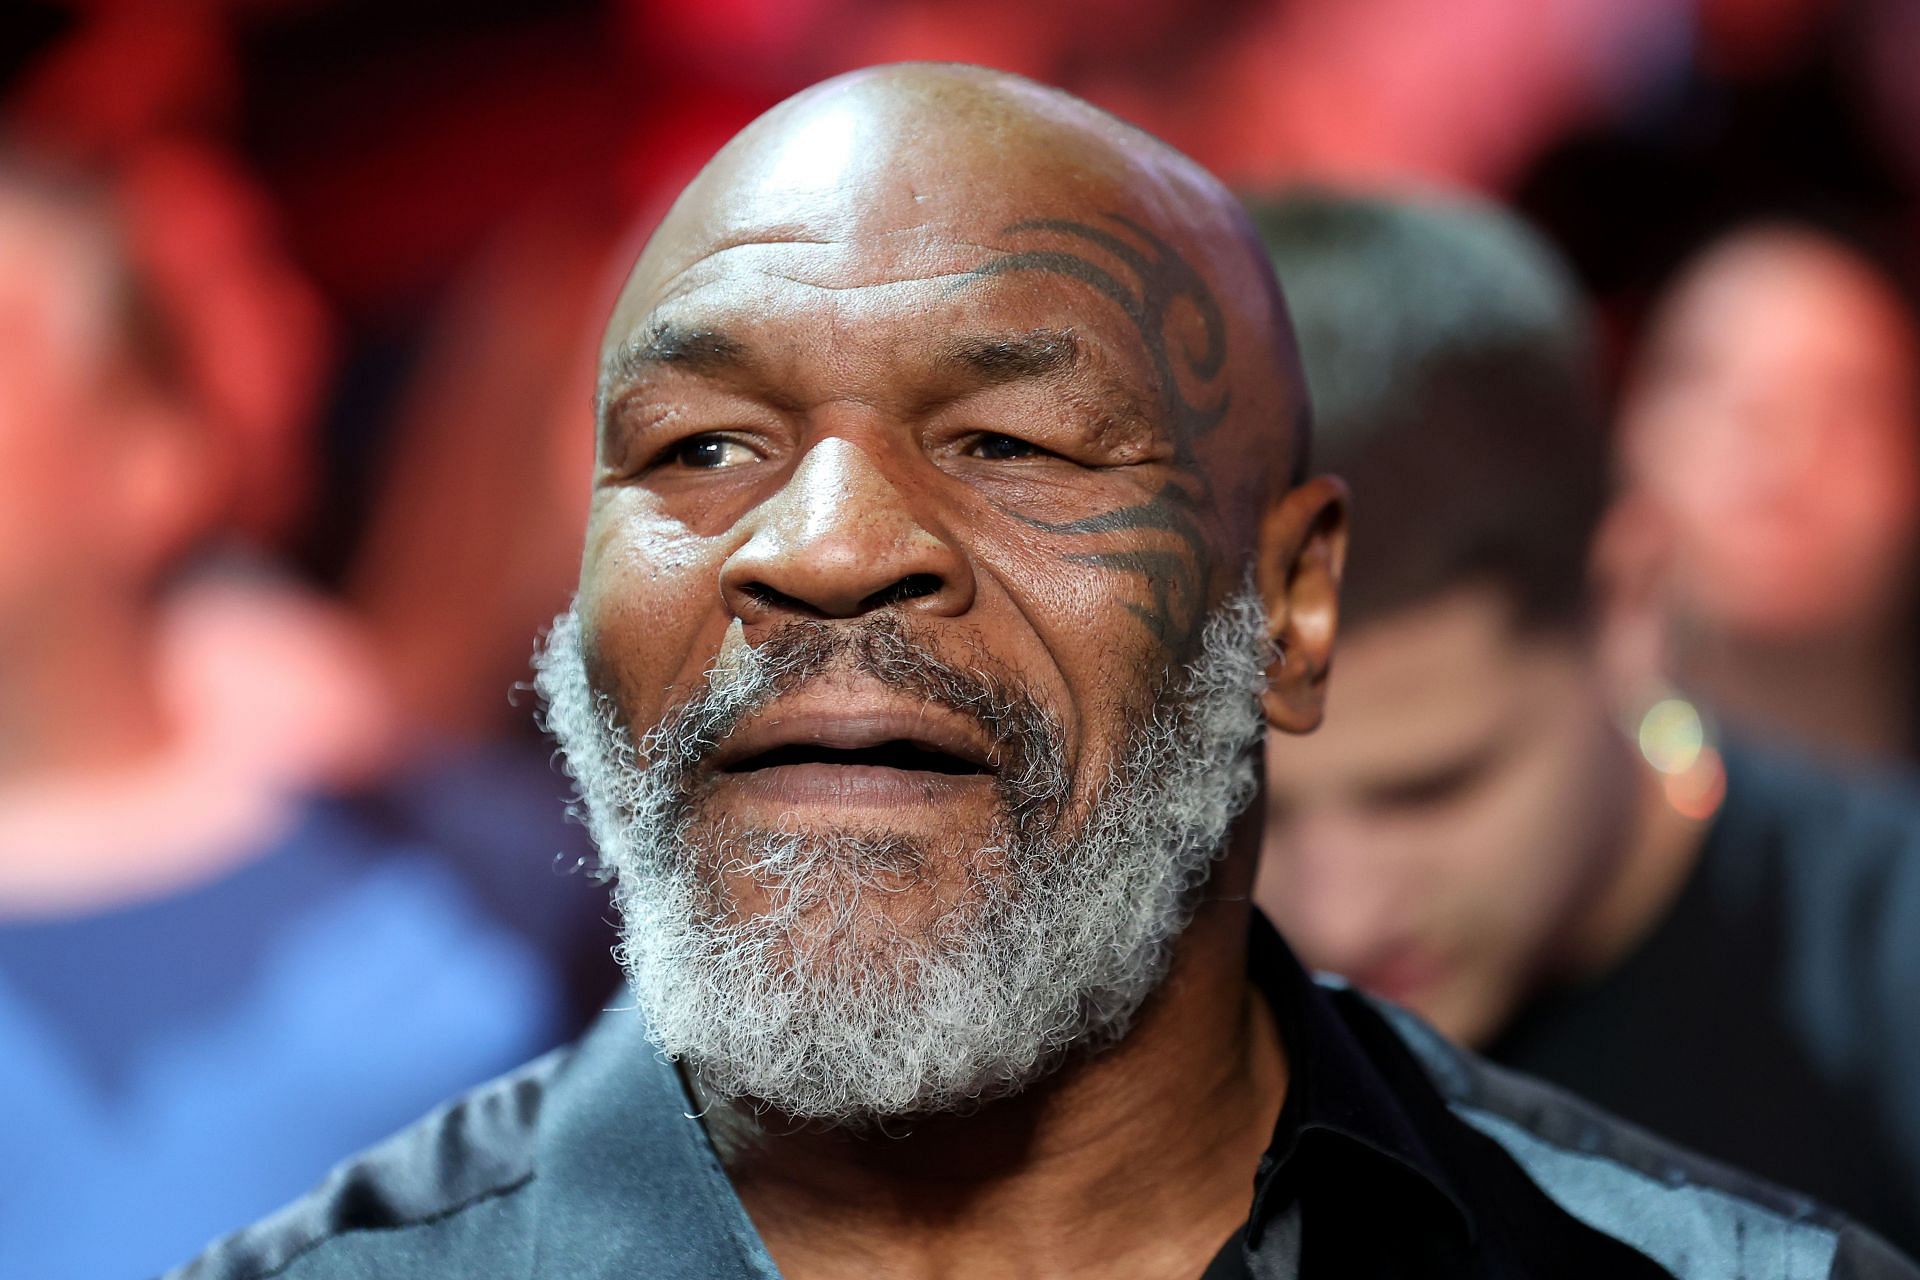 Mike Tyson has discusses why he was on JetBlue when his fan altercation occured.